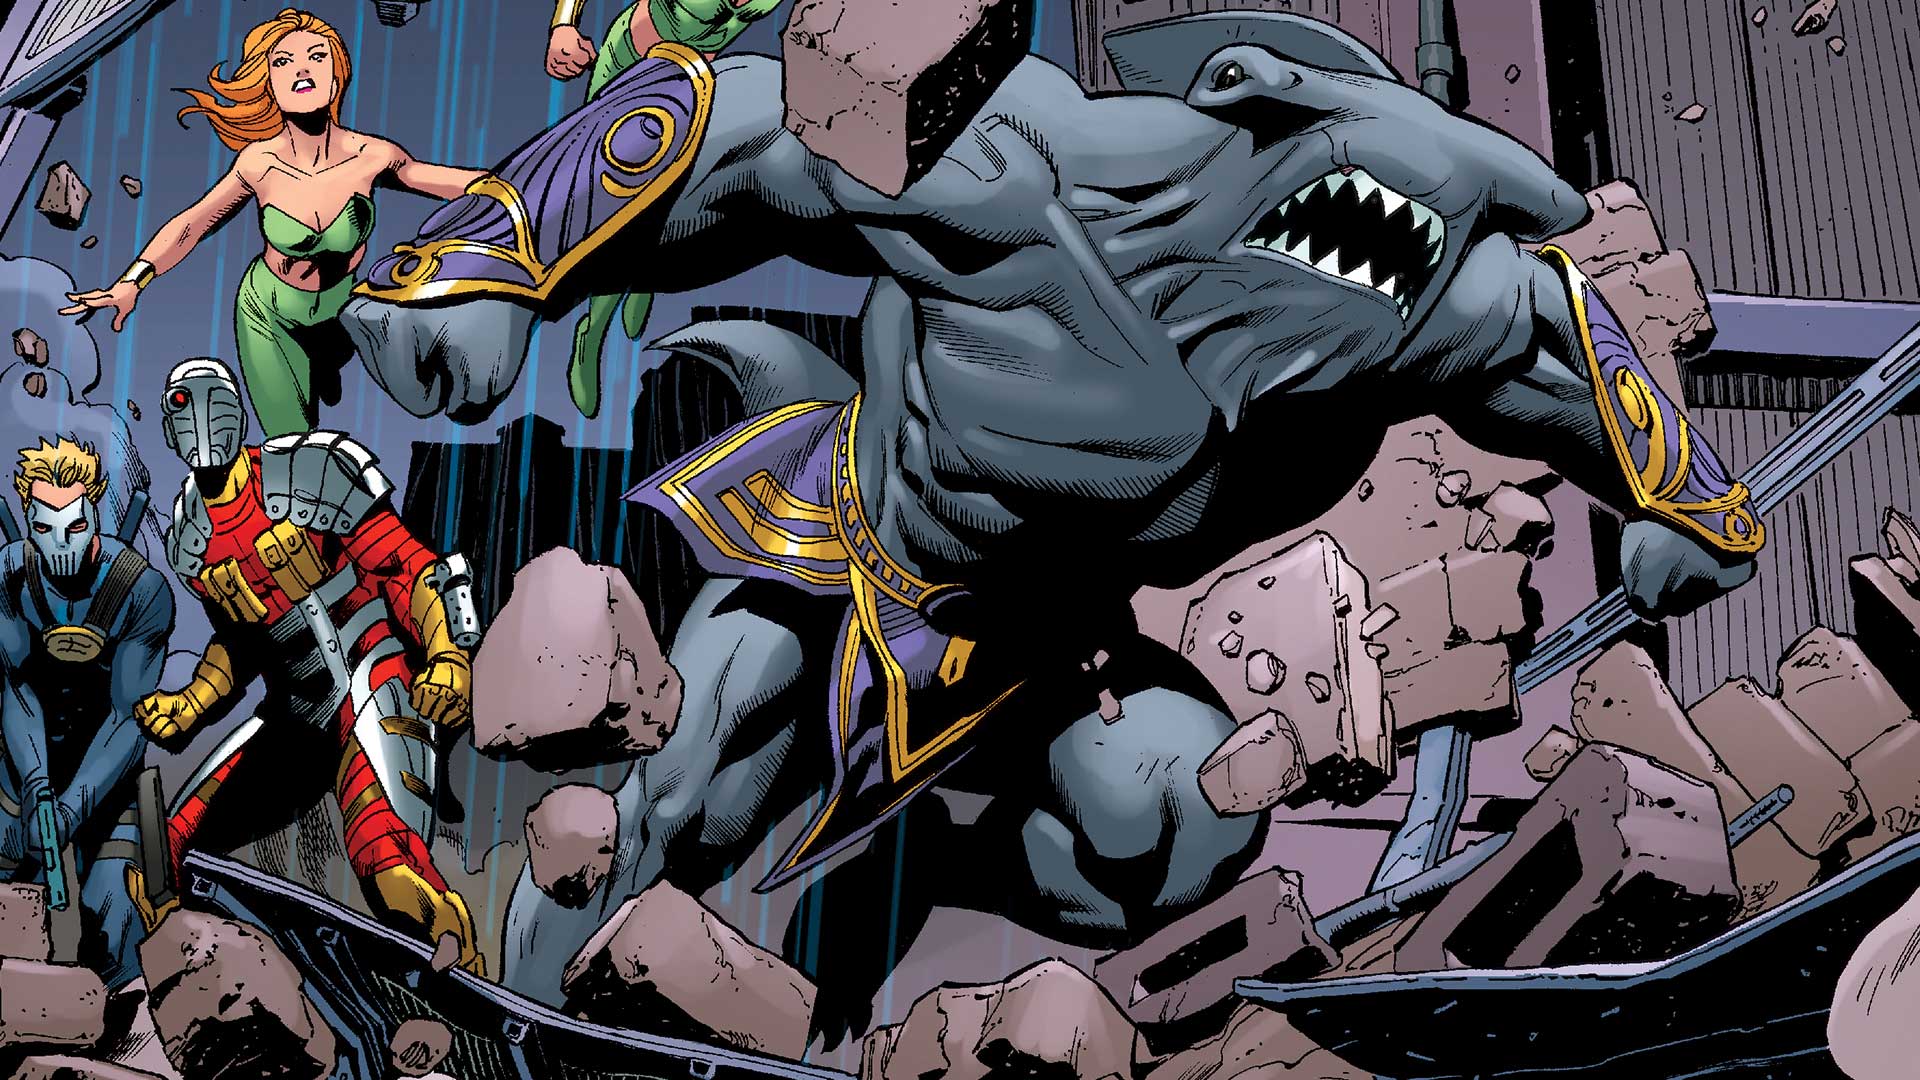 King Shark in the New 52 finds a permanent home with the Suicide Squad, and permanent enemy in Aquaman.